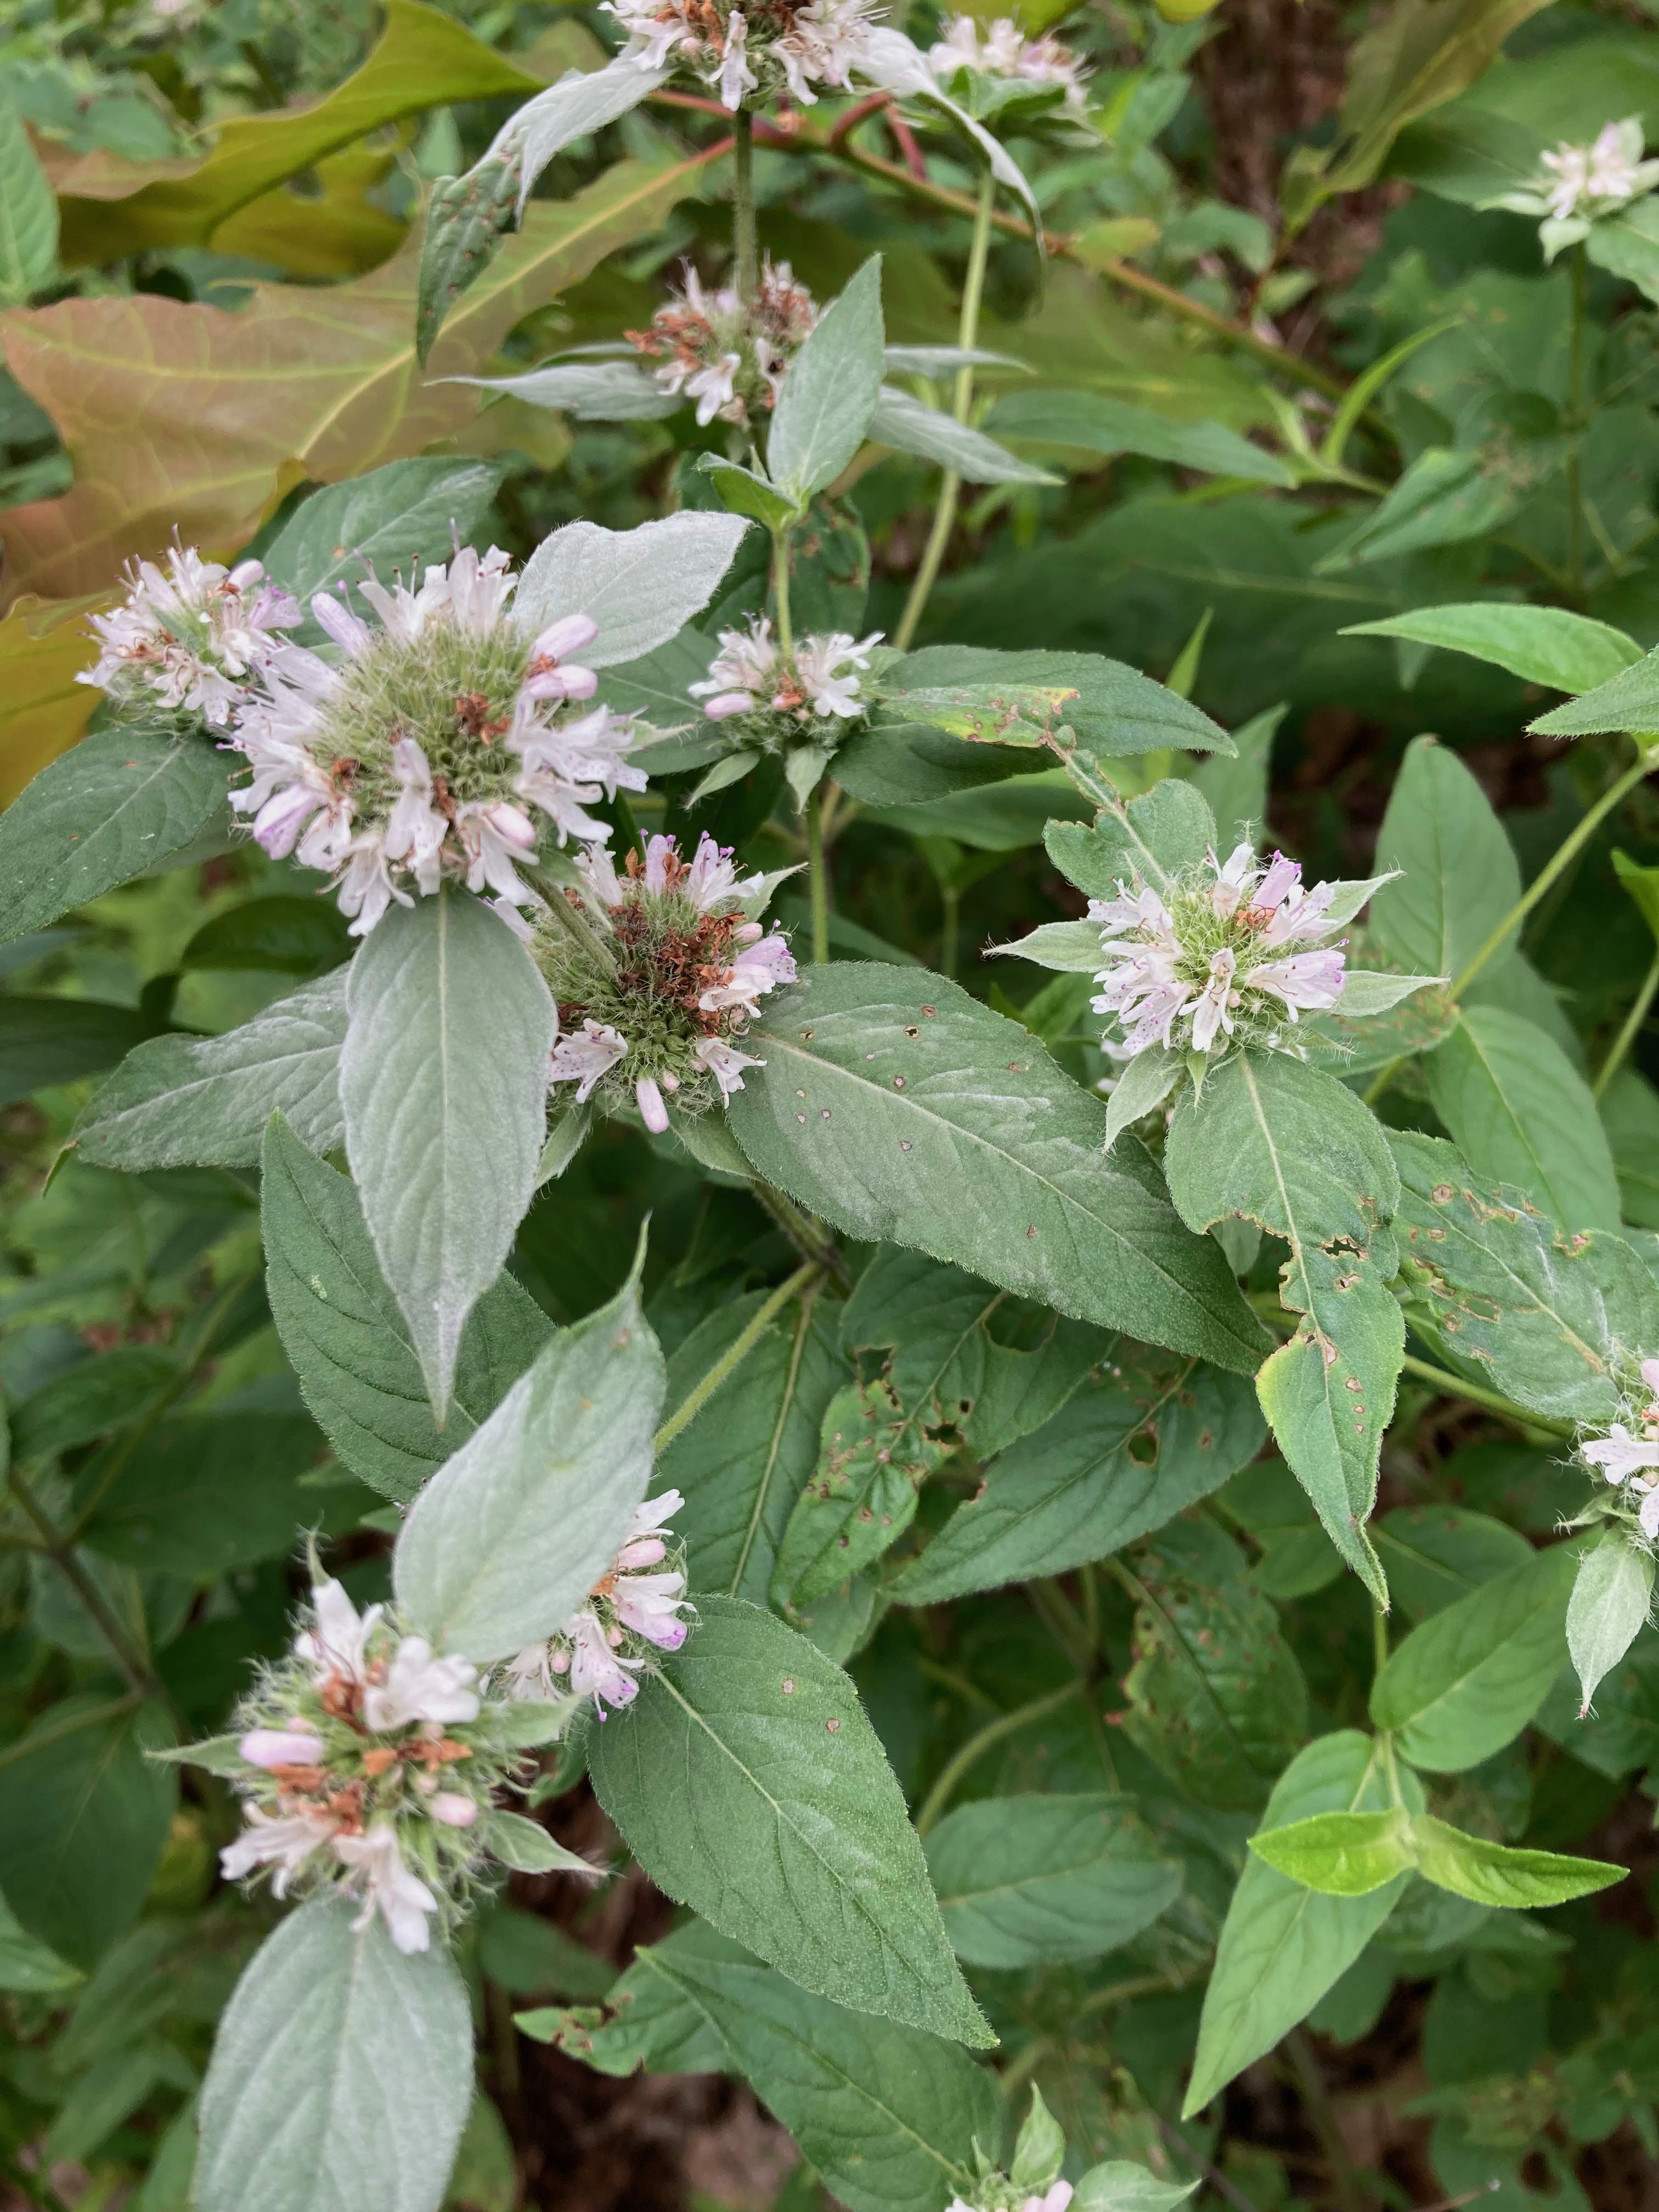 The Scientific Name is Pycnanthemum incanum. You will likely hear them called Hoary Mountain-mint, Silverleaf Mountain-mint. This picture shows the The individual flowers are small and generally white with some purple spots on the lower lip.  of Pycnanthemum incanum